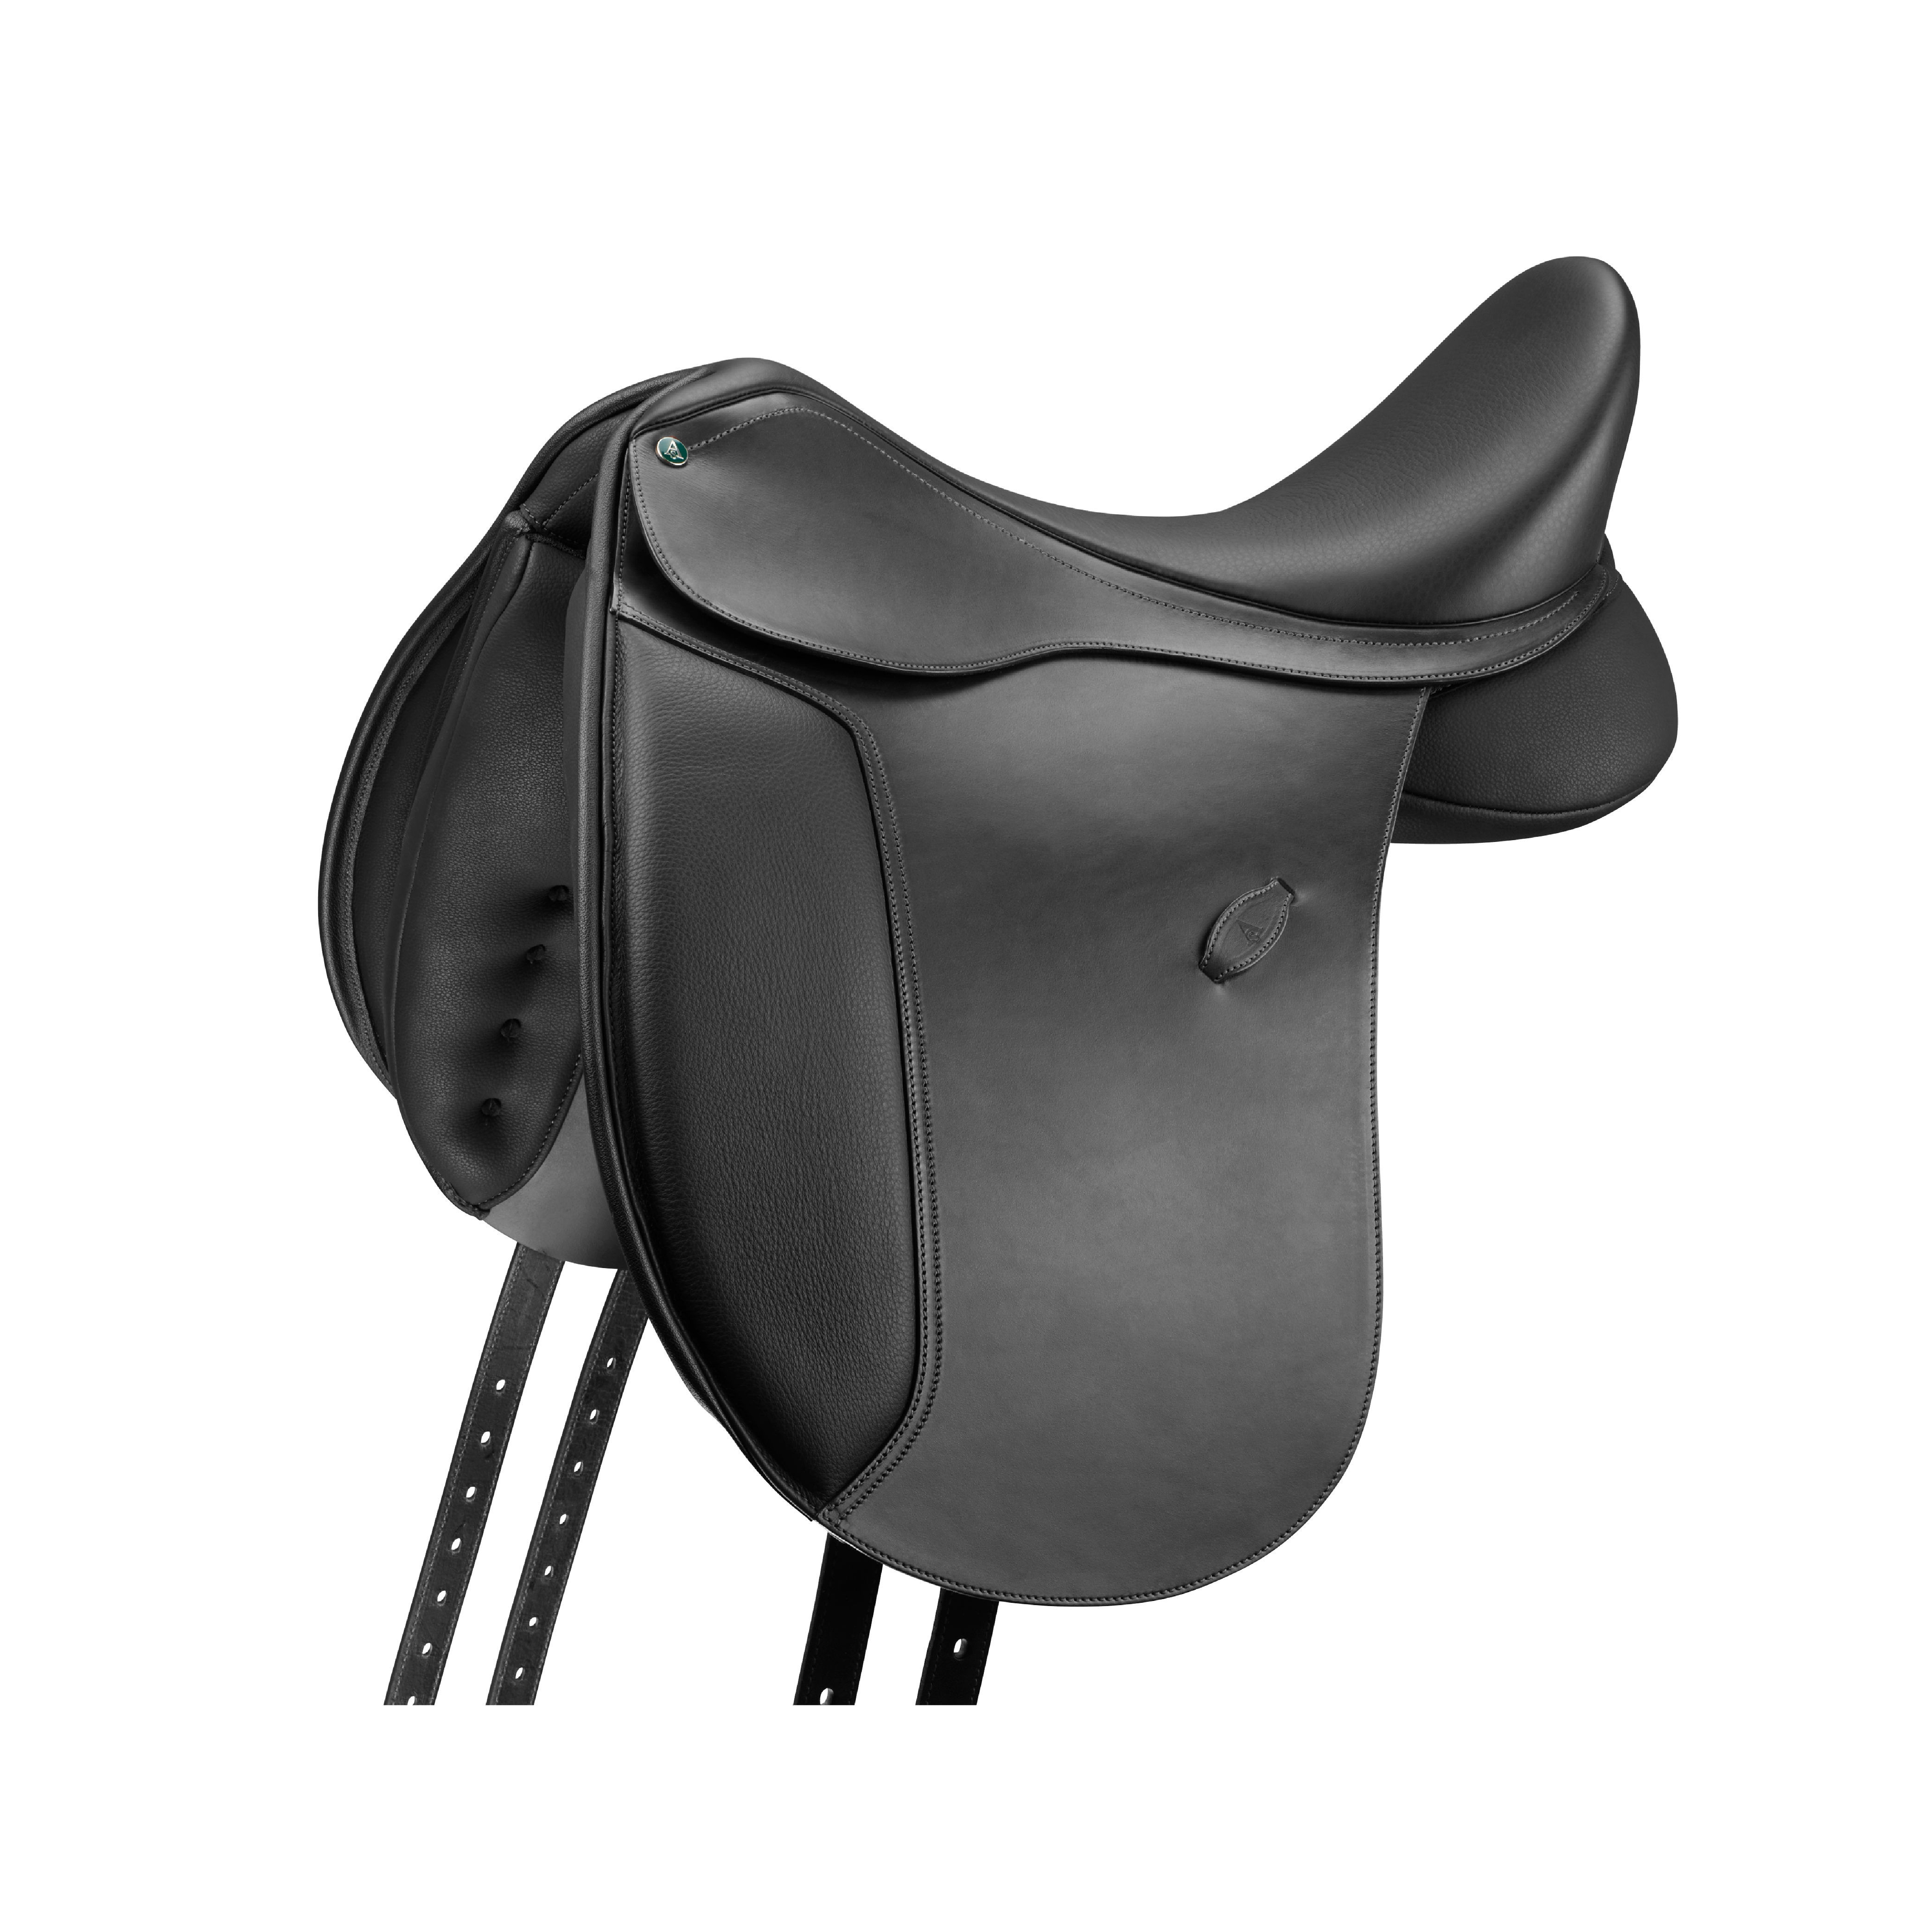 Arena High Wither Dressage saddle - 451:31751477002291,31751477035059,31751476936755,31751476969523